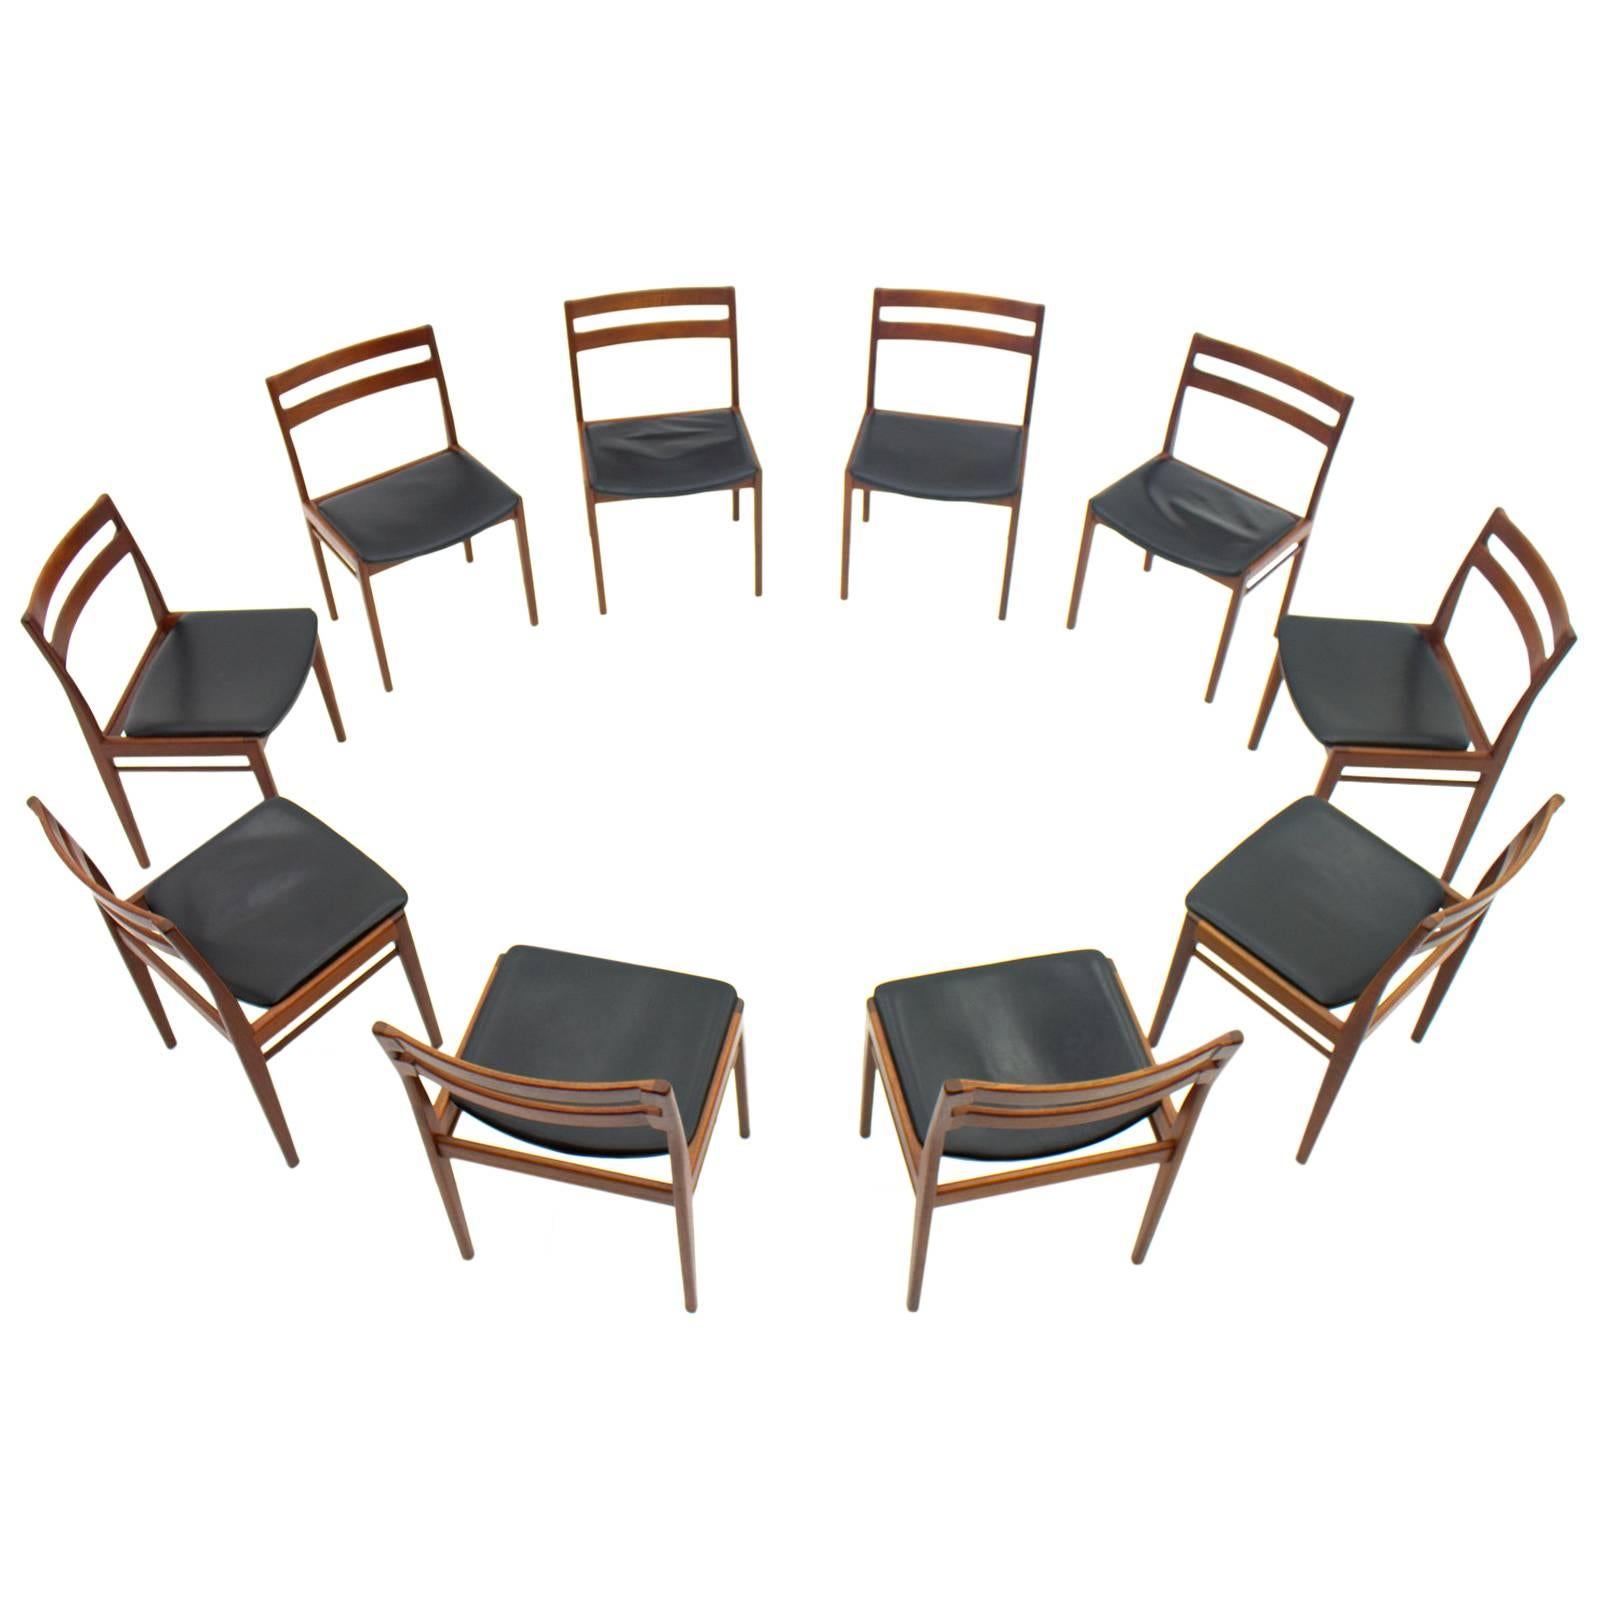 Set of Ten Danish Teak and Leather Dining Chairs by Rosengren Hansen, 1960s For Sale